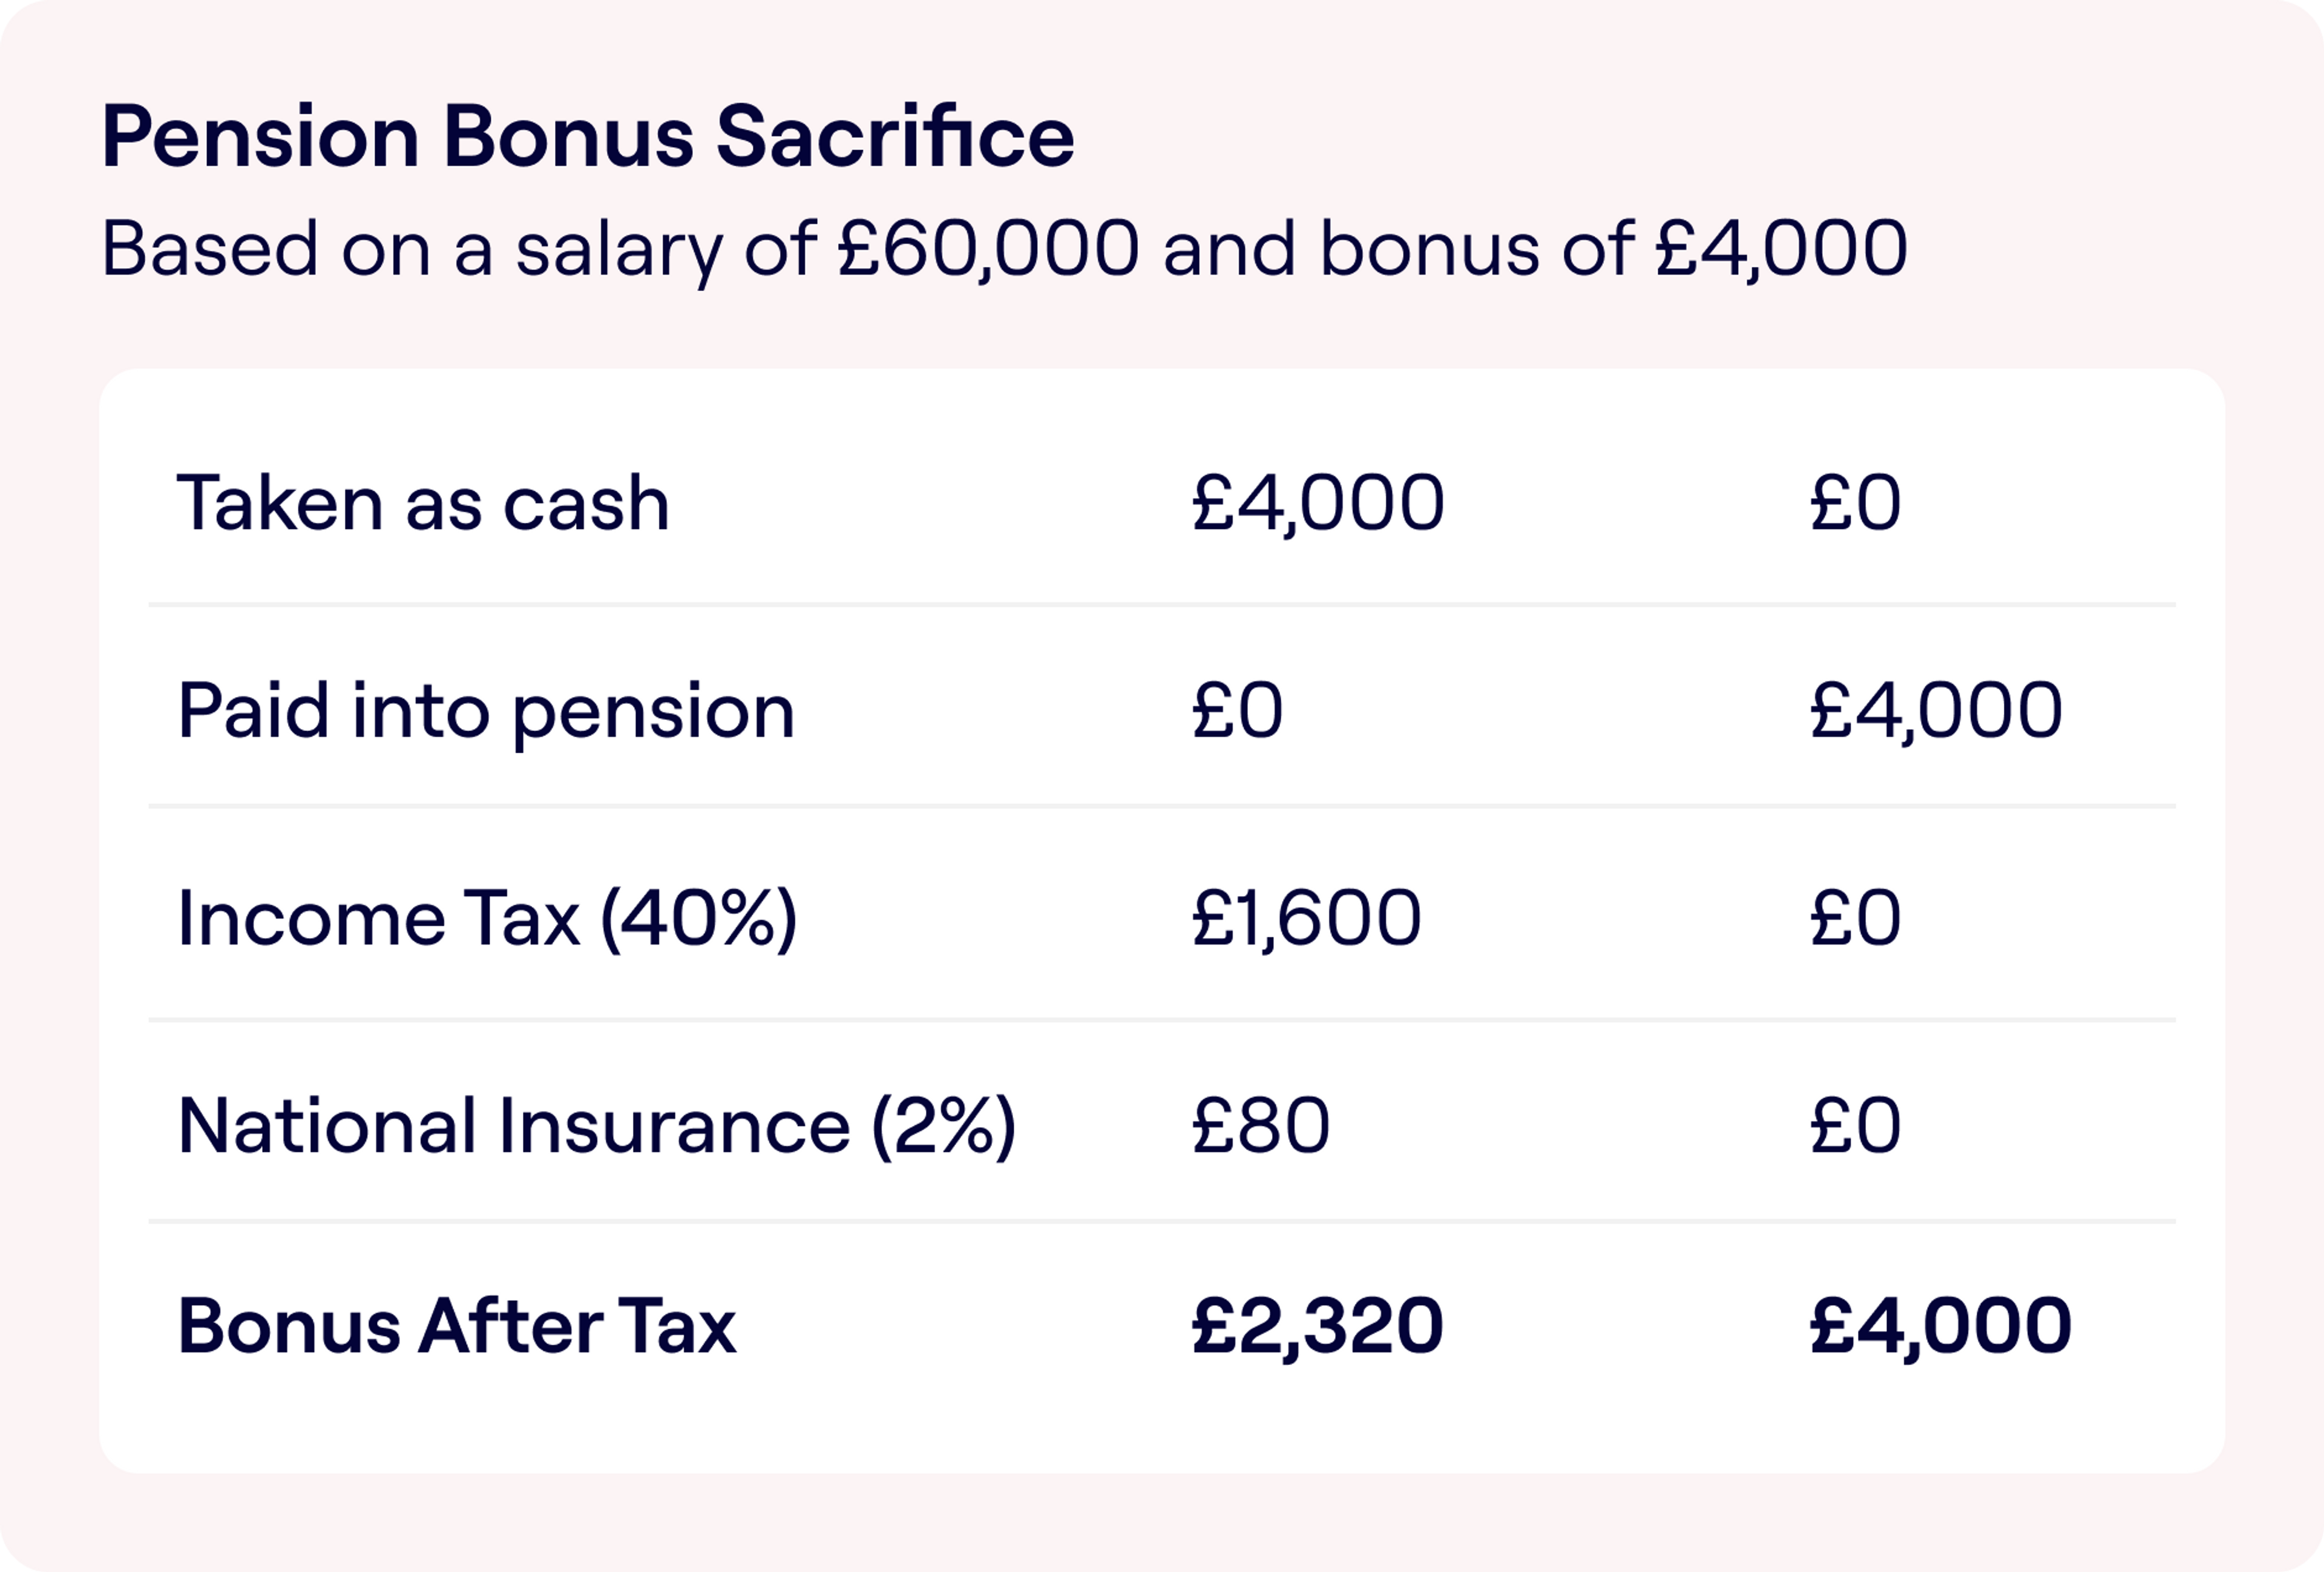 A financial comparison table titled 'Pension Bonus Sacrifice' based on a salary of £60,000 and a bonus of £4,000. The table compares taking a bonus as cash versus paying it into a pension. In the 'Taken as cash' scenario, £4,000 is reduced by a 40% income tax (£1,600) and 2% national insurance (£80), leaving a 'Bonus After Tax' of £2,320. In the 'Paid into pension' column, the entire £4,000 bonus is allocated to the pension without any deductions, resulting in a 'Bonus After Tax' of £4,000.